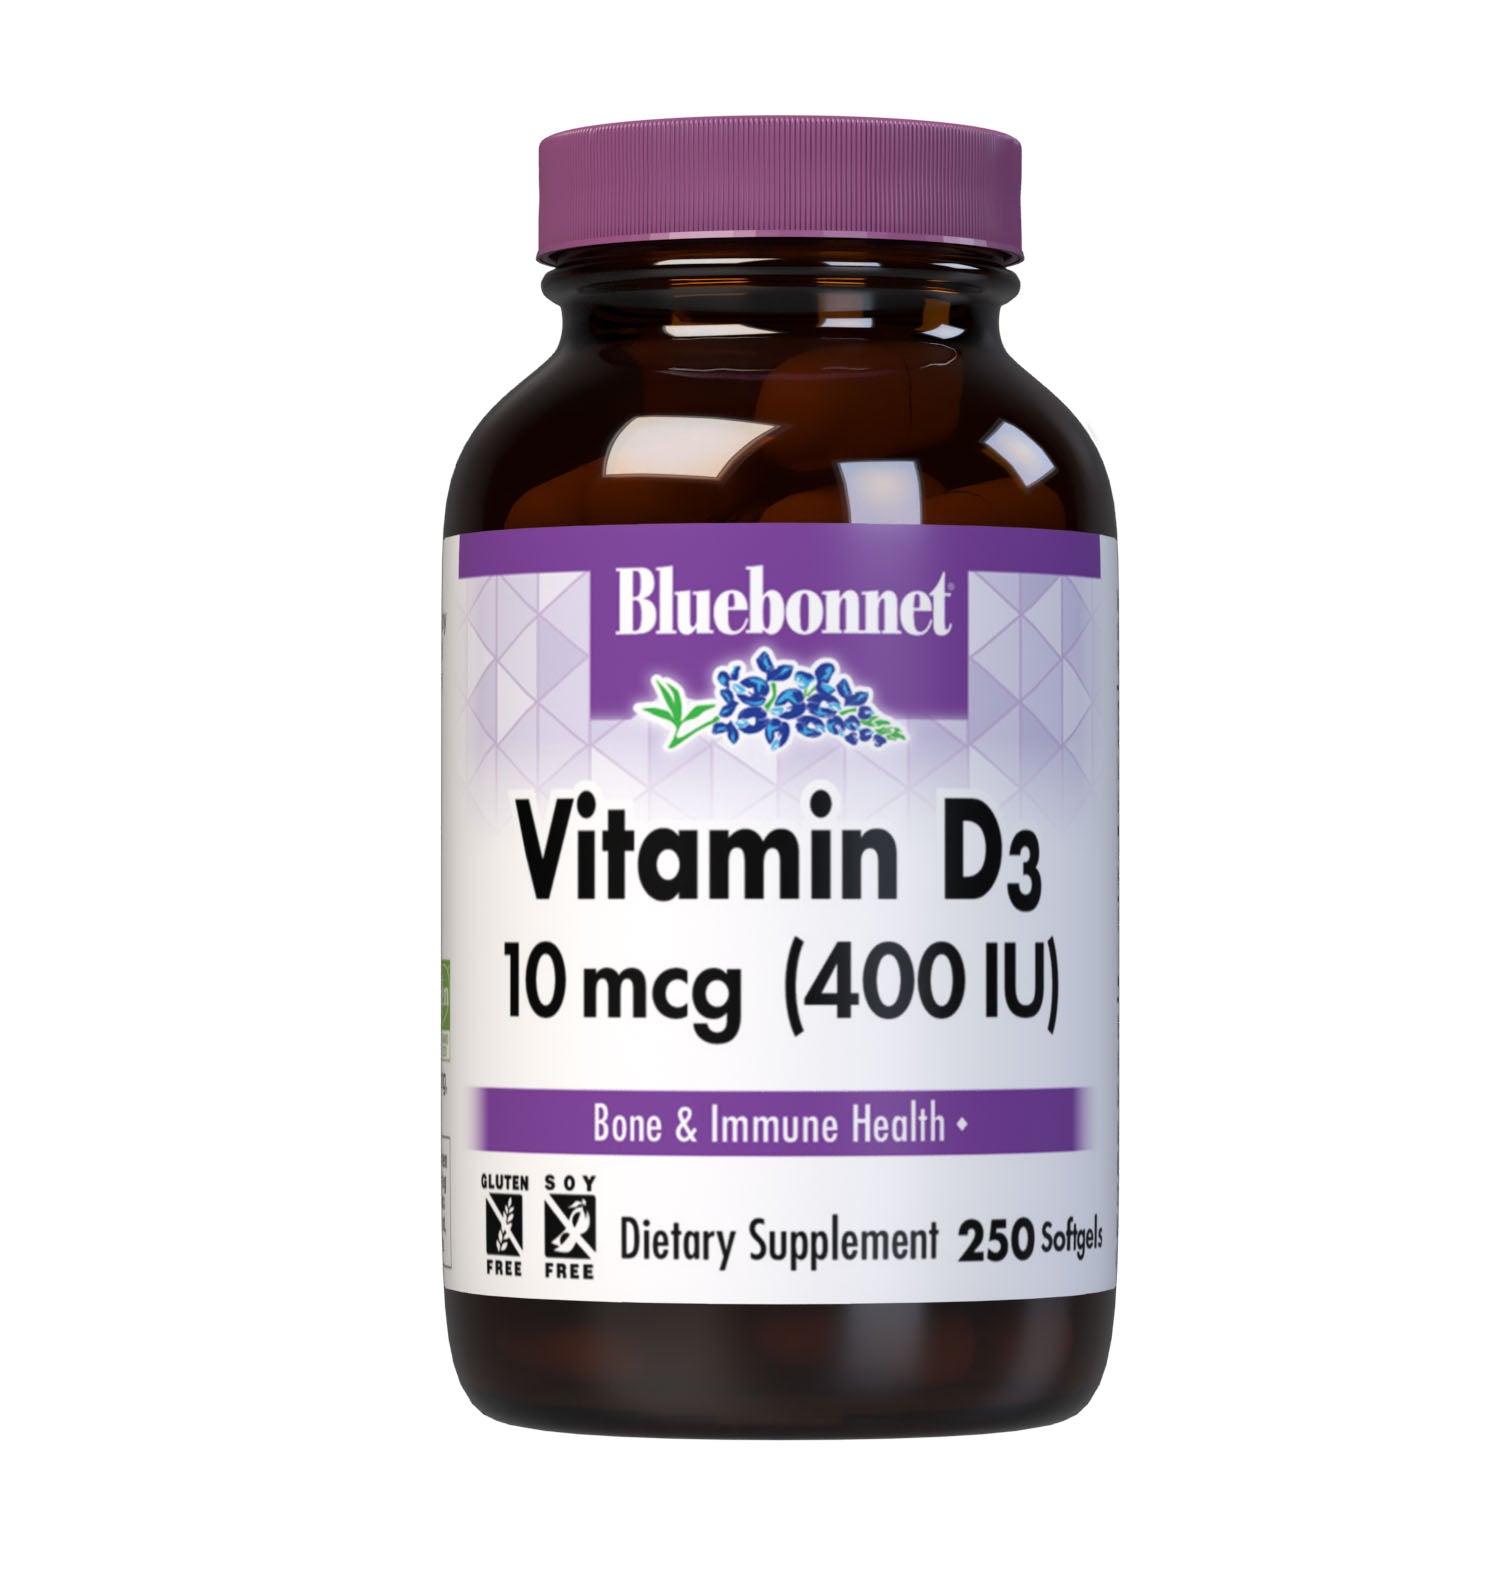 Bluebonnet’s Vitamin D3 400 IU 250 Softgels are formulated with vitamin D3 (cholecalciferol) from molecularly distilled, deep sea, cold water, fish liver oil in a base of non-GMO safflower oil. #size_250 count